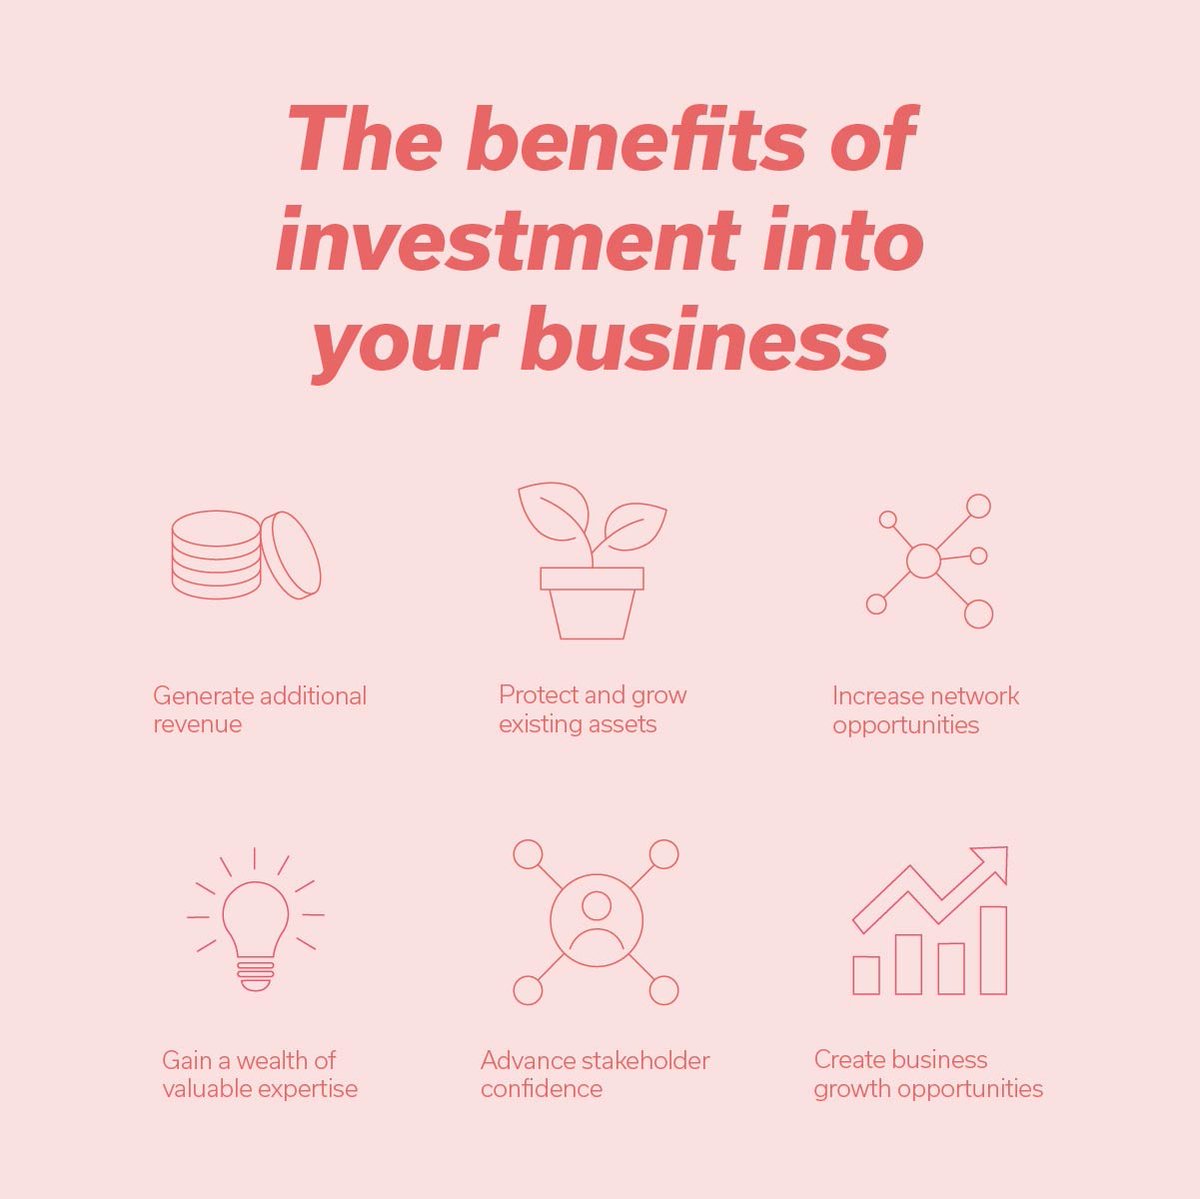 If you are considering an investment into your business, it is critical that every expectation is validated in detail. Atom Financial can help your business to become both an investor or prepare for investors to come into your business. l8r.it/4lEn